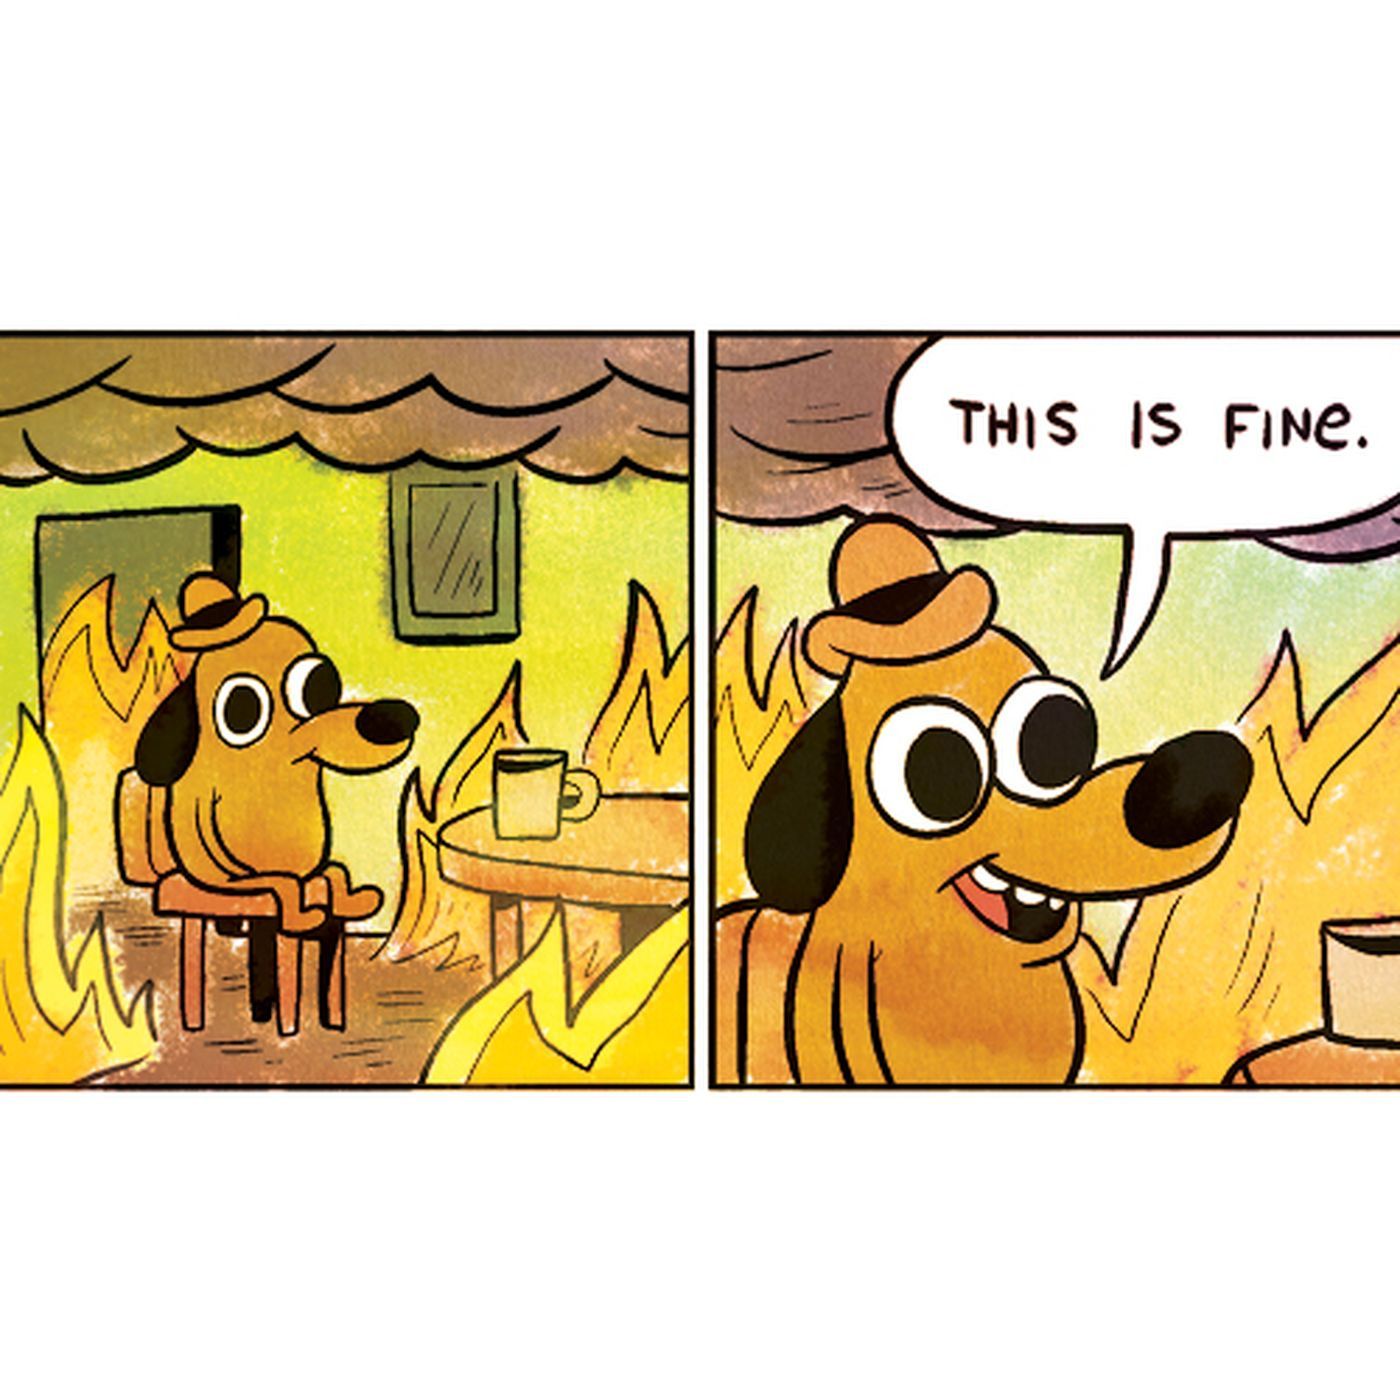 This is fine01